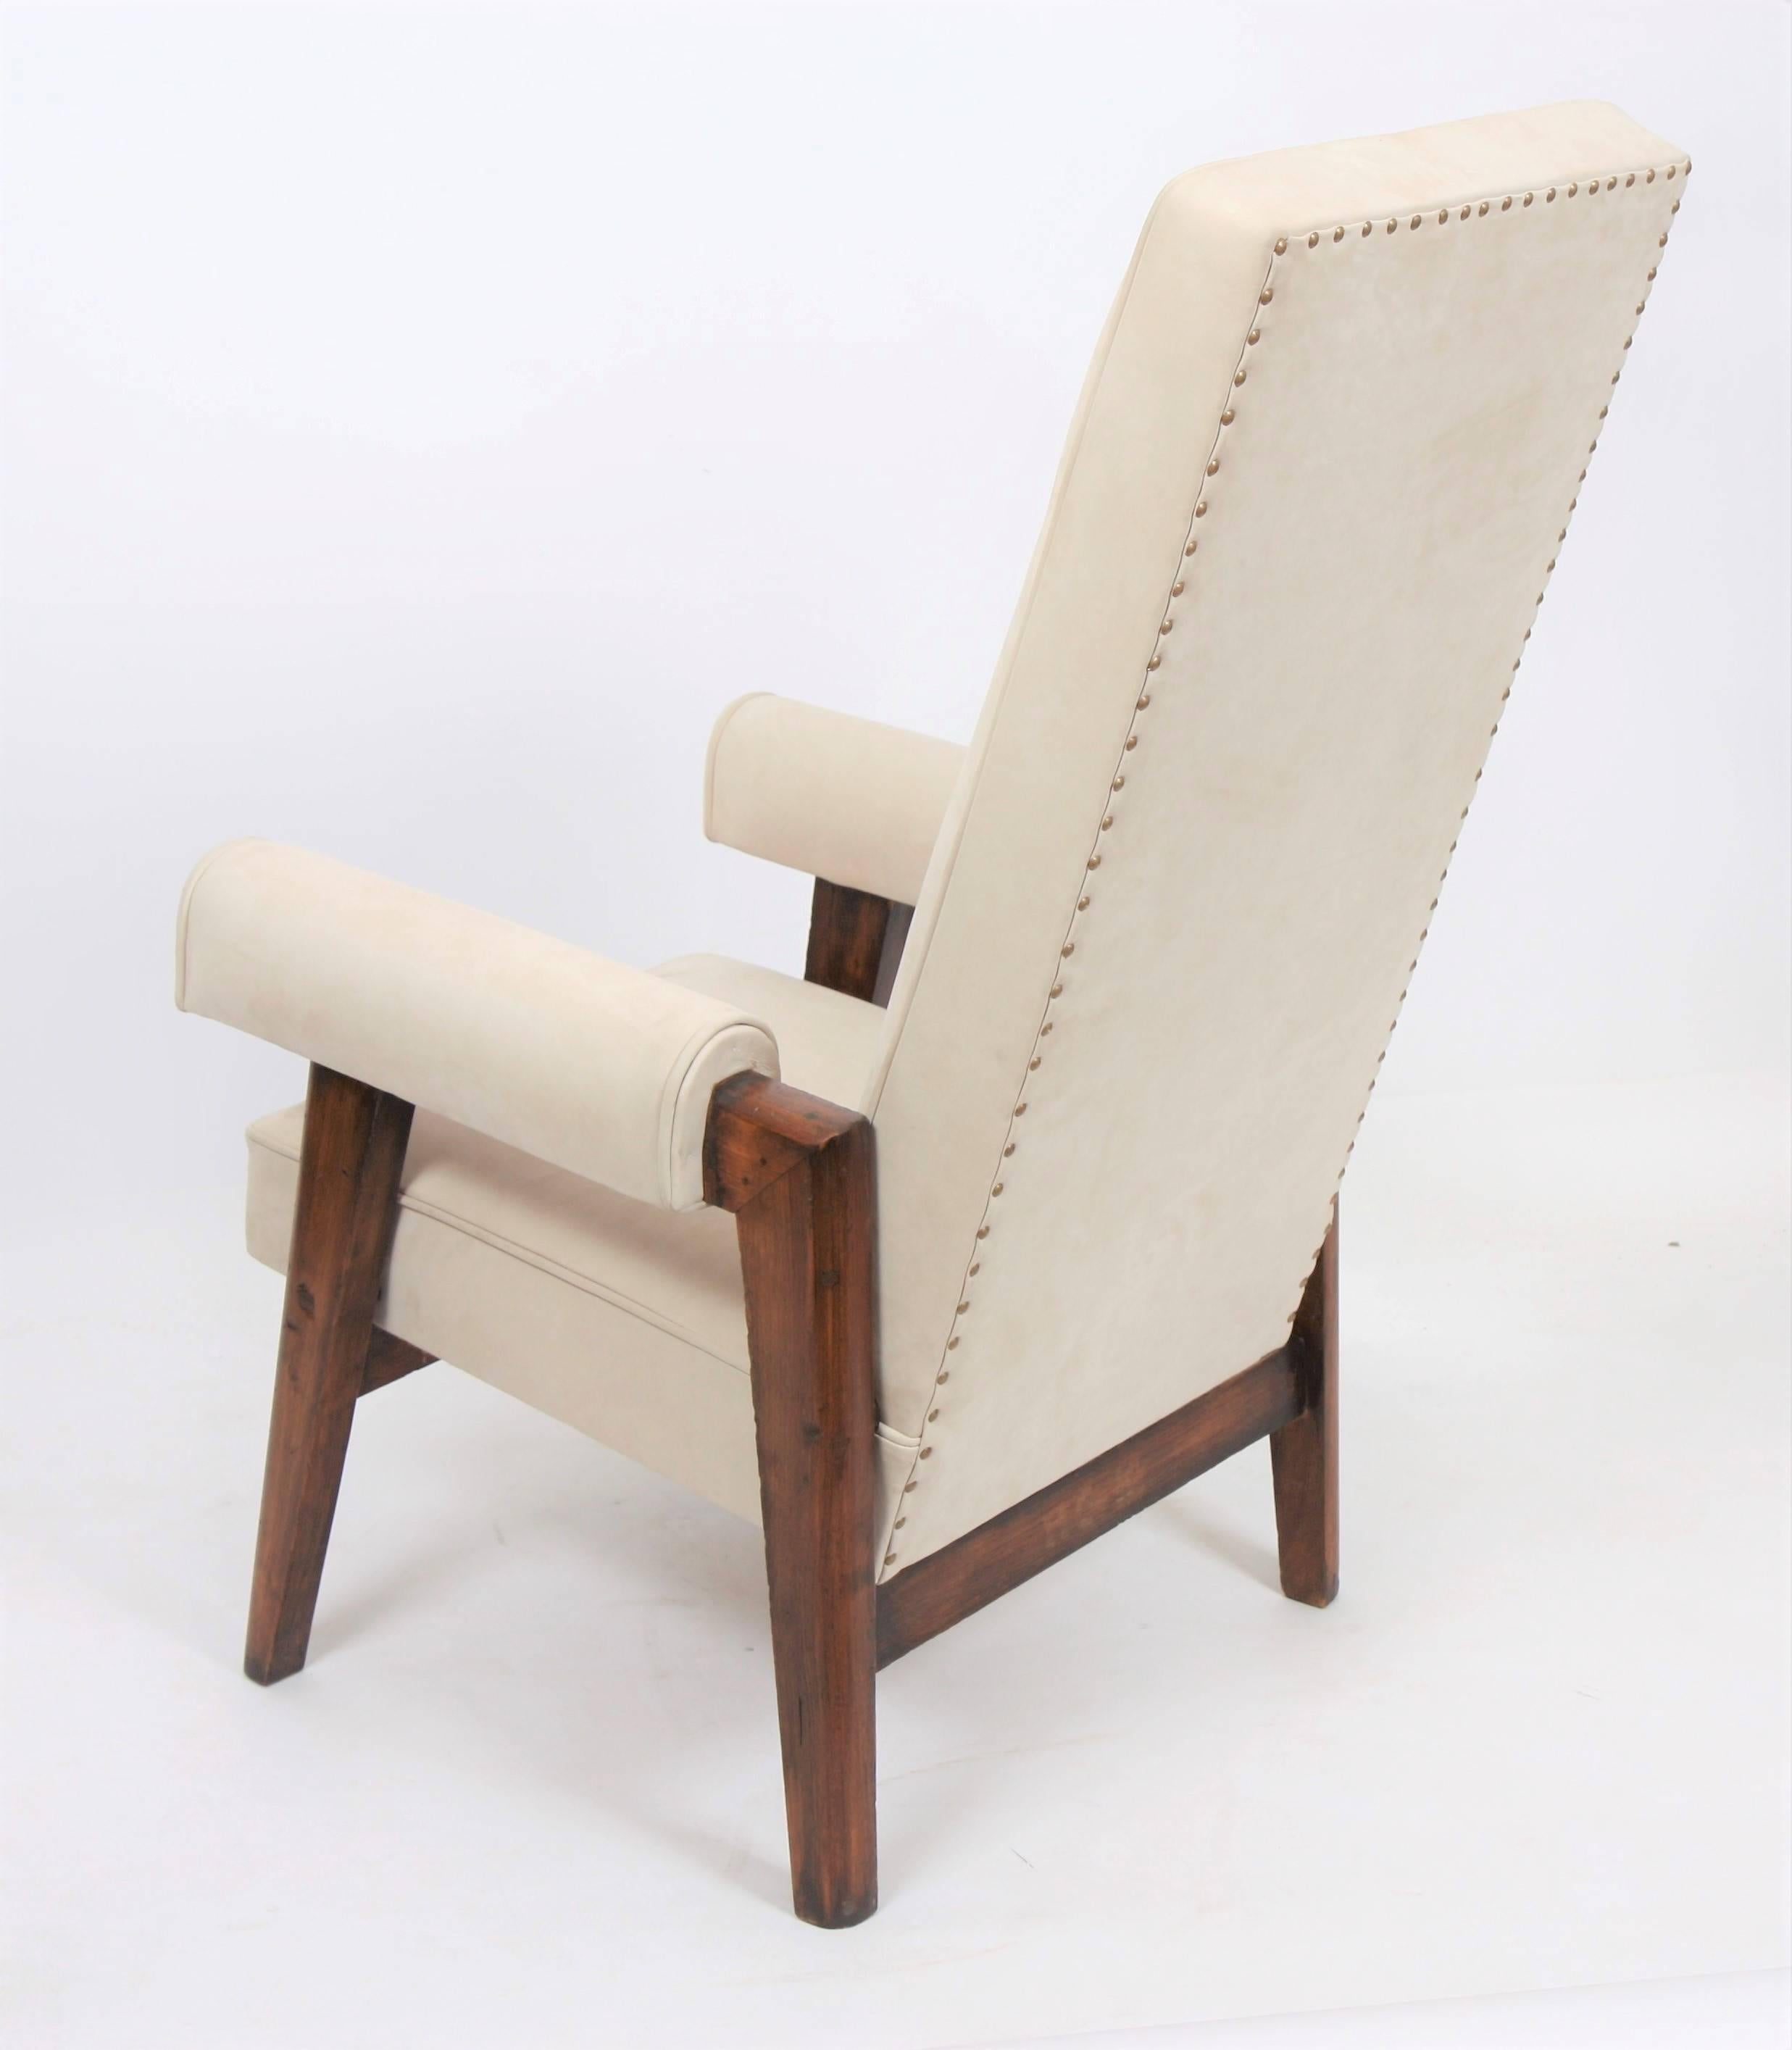 Important Judge chair in solid teak with flat inclined back, lateral base forming a bridge.
Detached armrests with rounded cuffs.
Seat, backrest and cuffs covered with a restored white leather.
circa 1955.
Provenance: Court of Chandigarh,